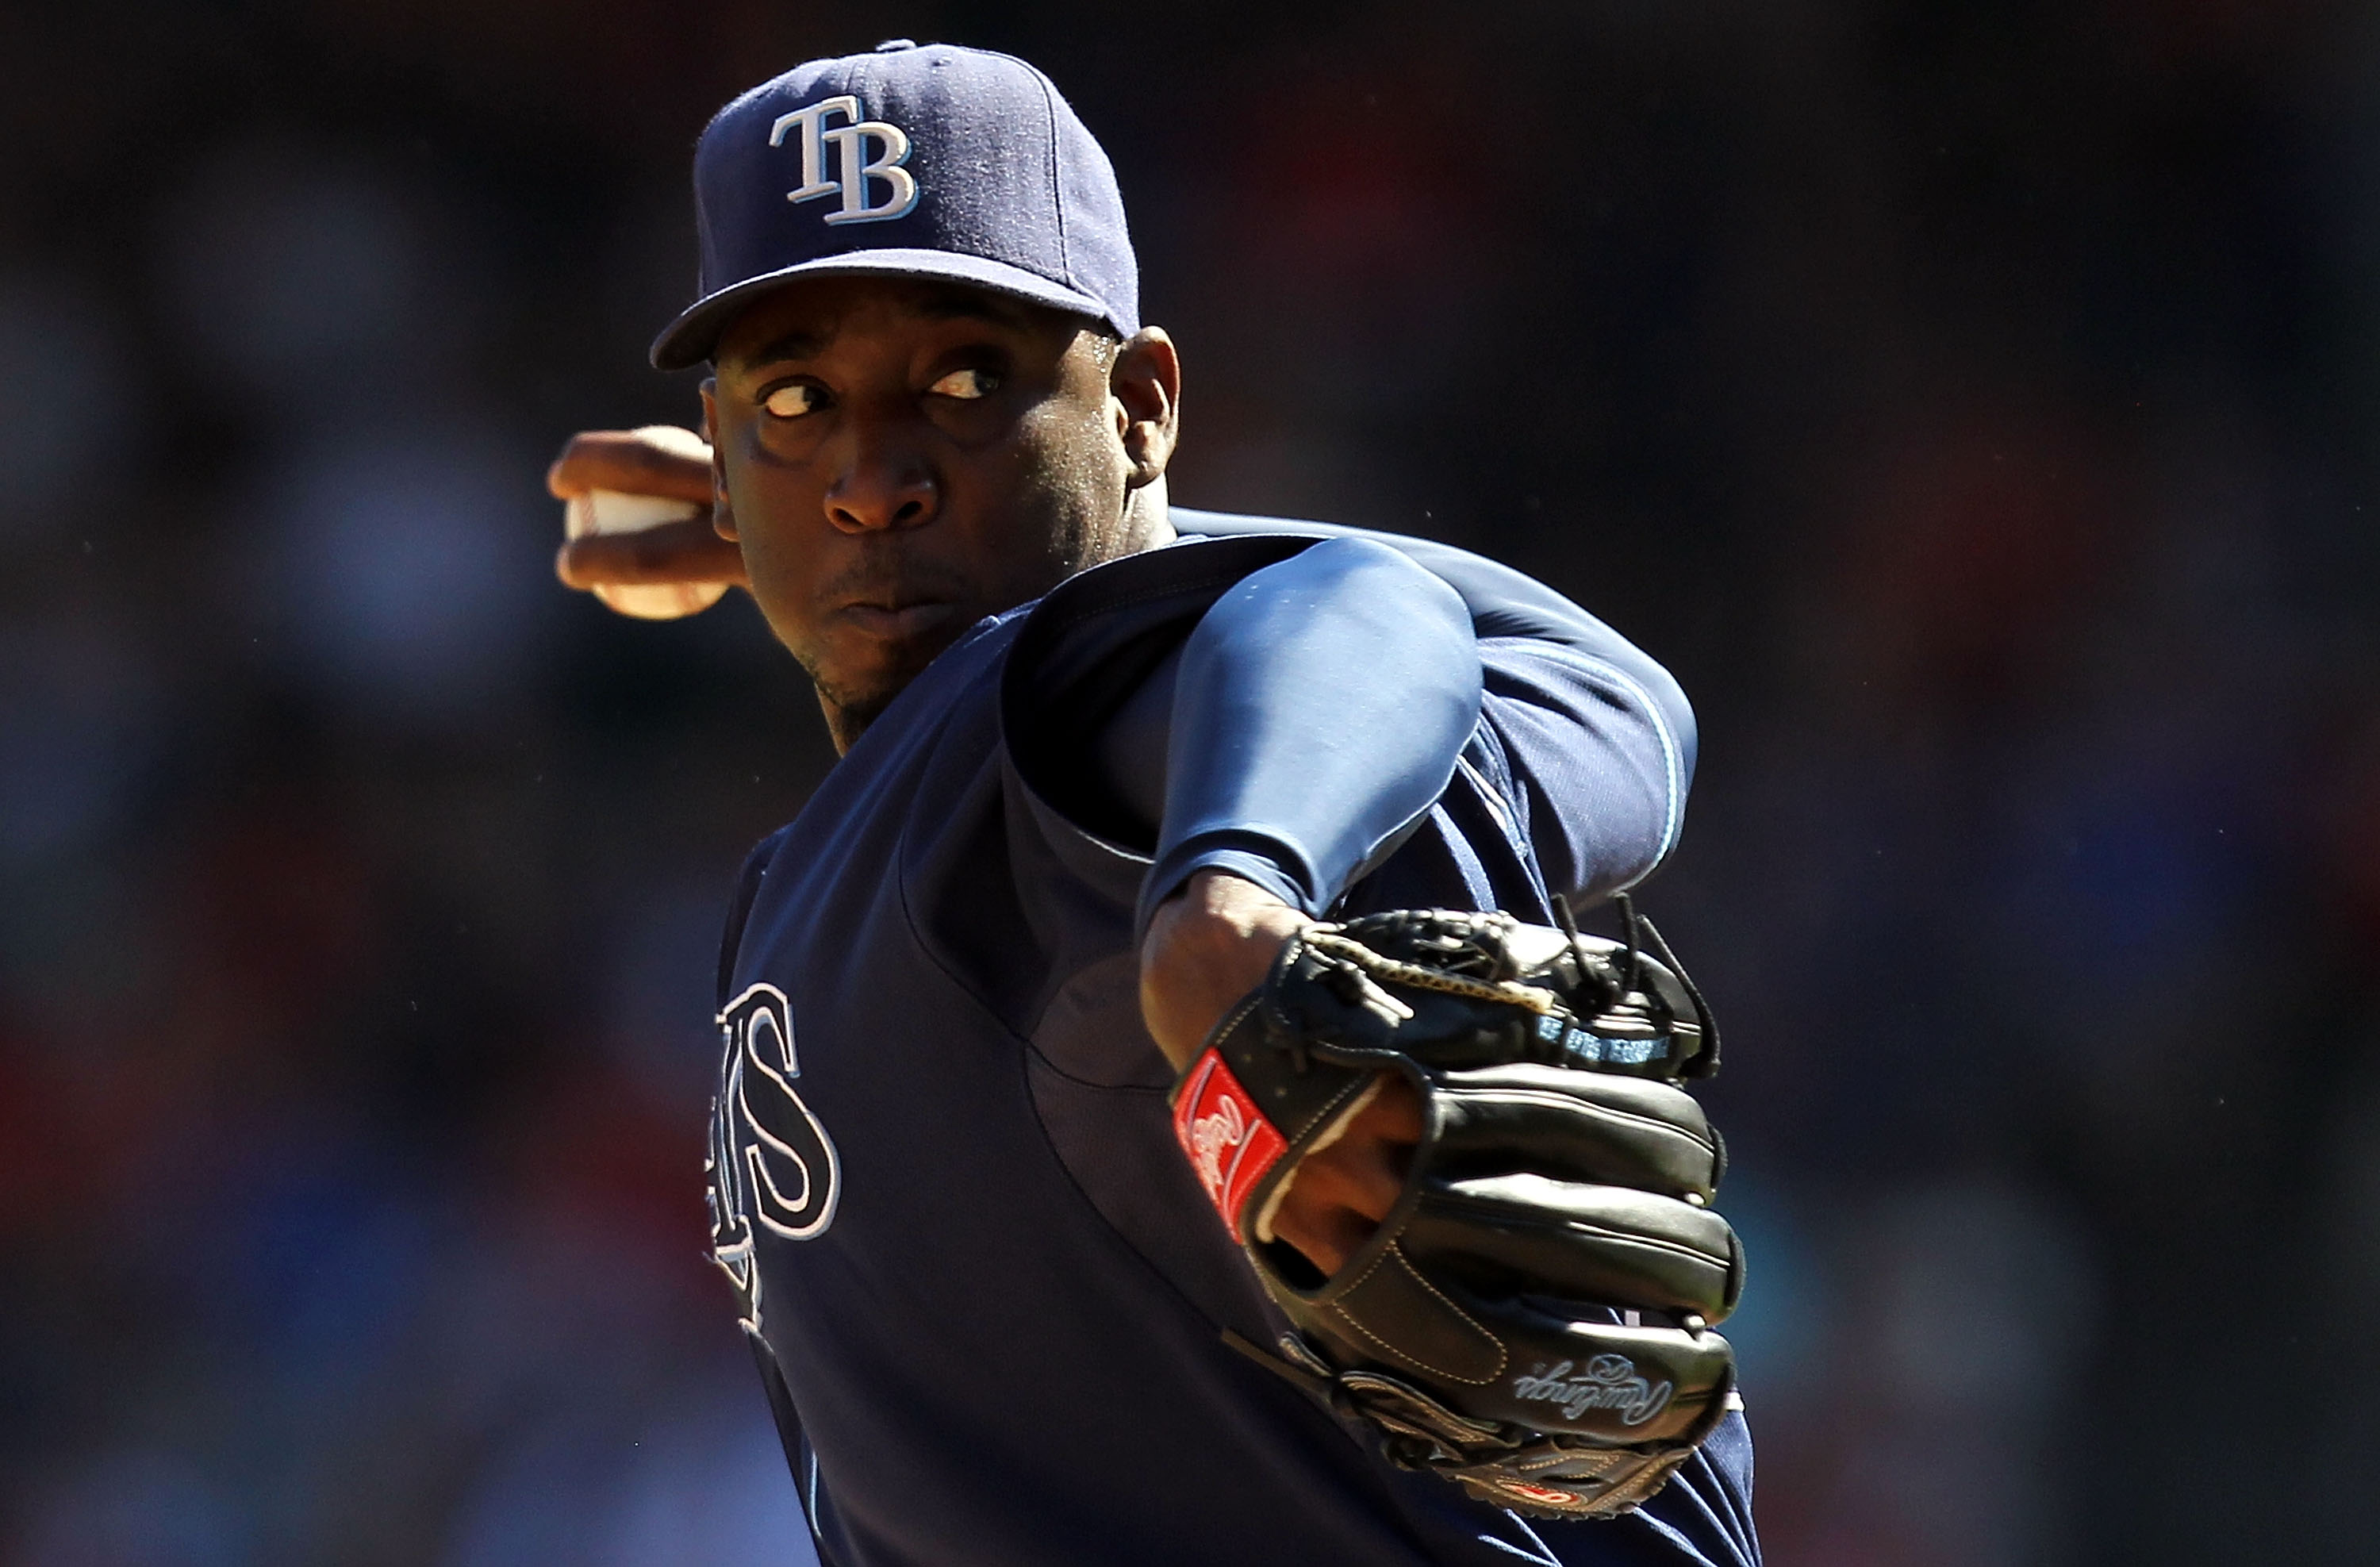 Fantasy fallout: Edgar Renteria signs with Giants